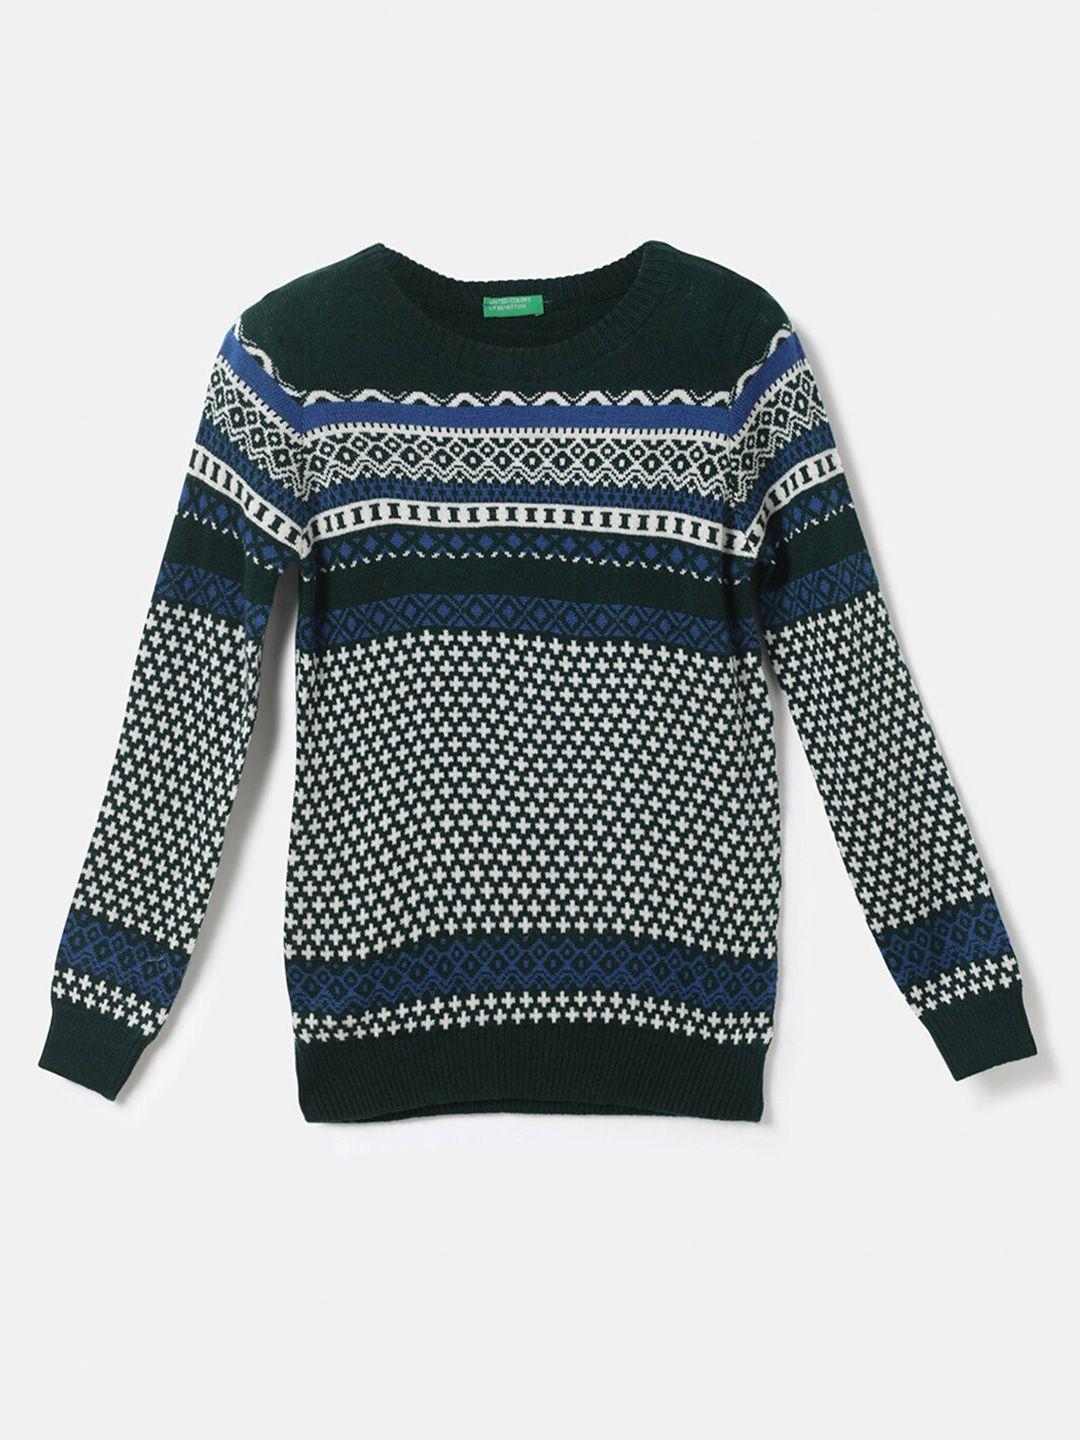 united colors of benetton boys green & blue printed pullover